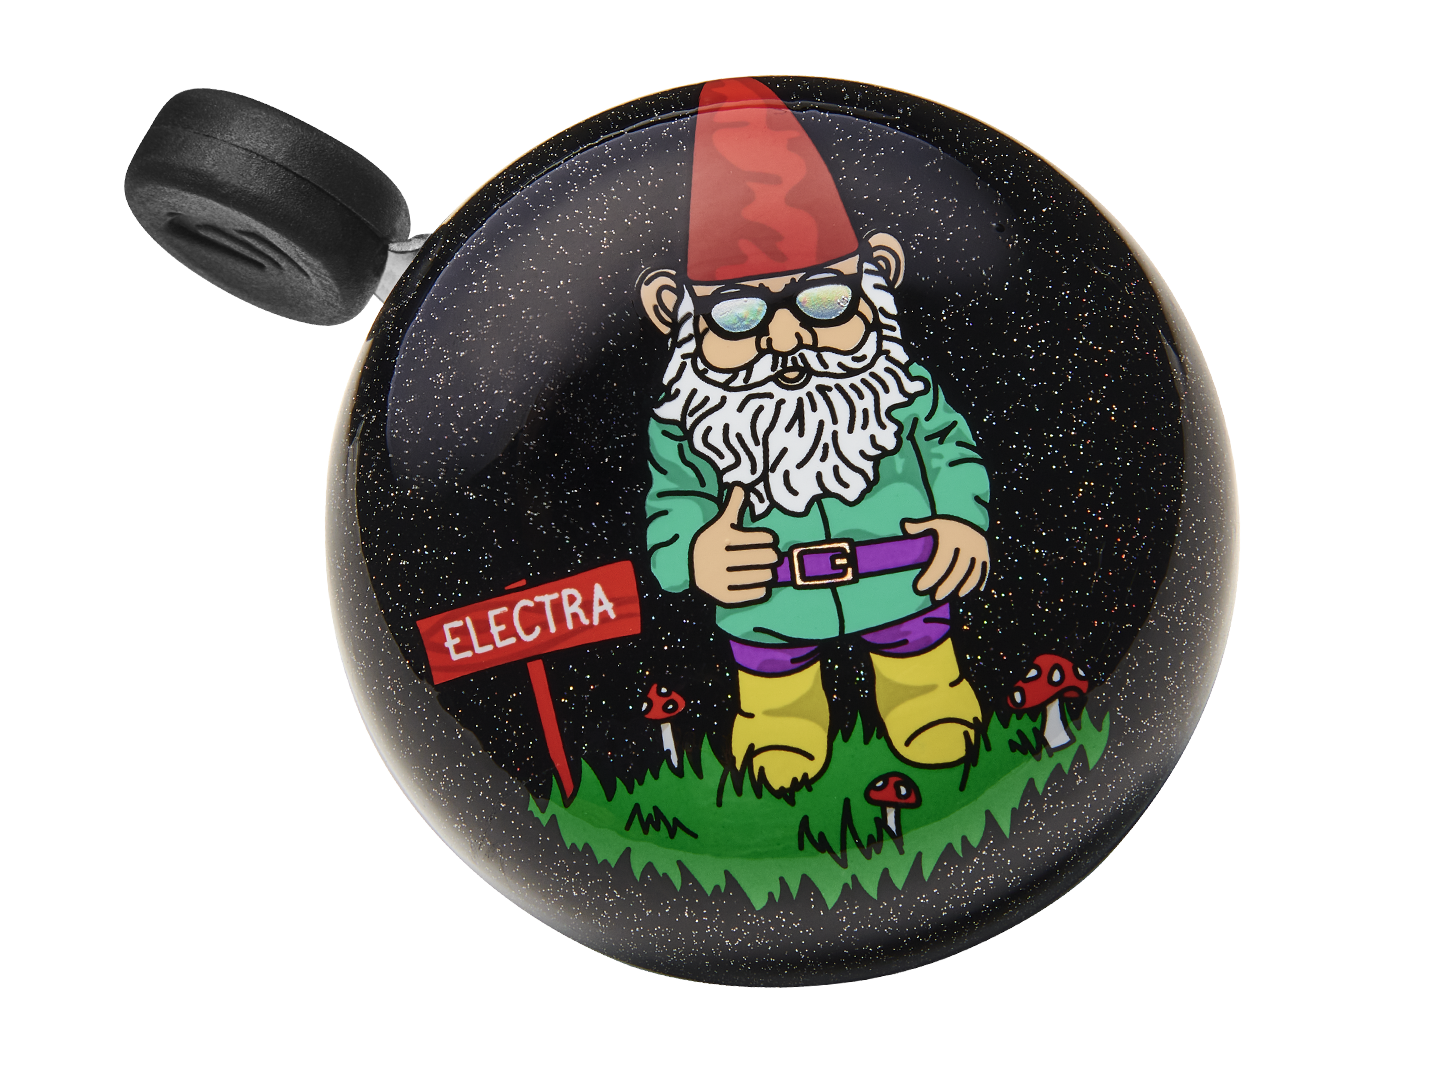 Bell Electra Domed Ringer Gnome